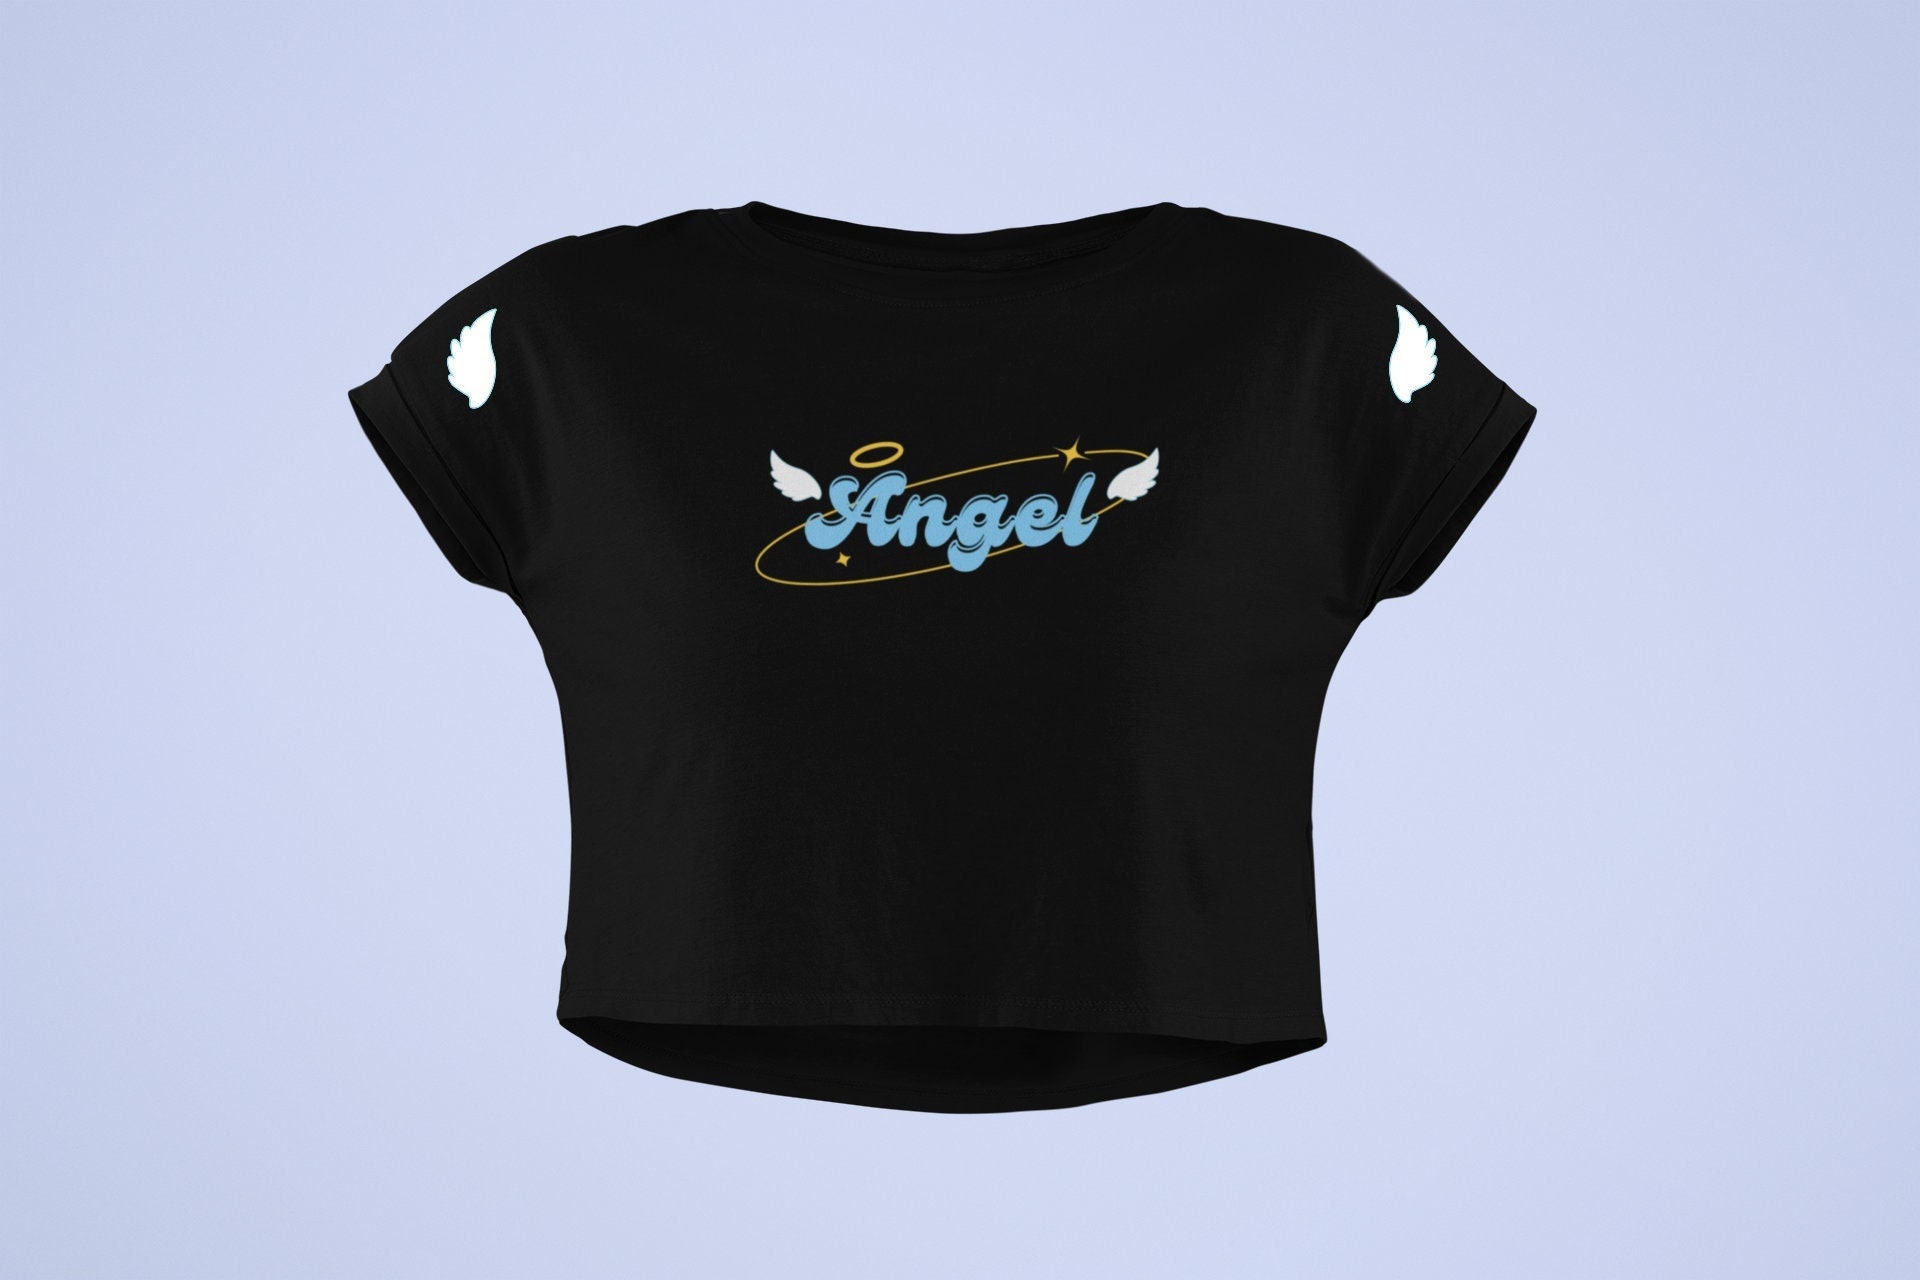 Angel Crop Top Flowy Fit Crop Top Y2K Clothing Trendy Top Graphic T-shirt  Cute Gift Gift for Women Gift for Girl Unisex 